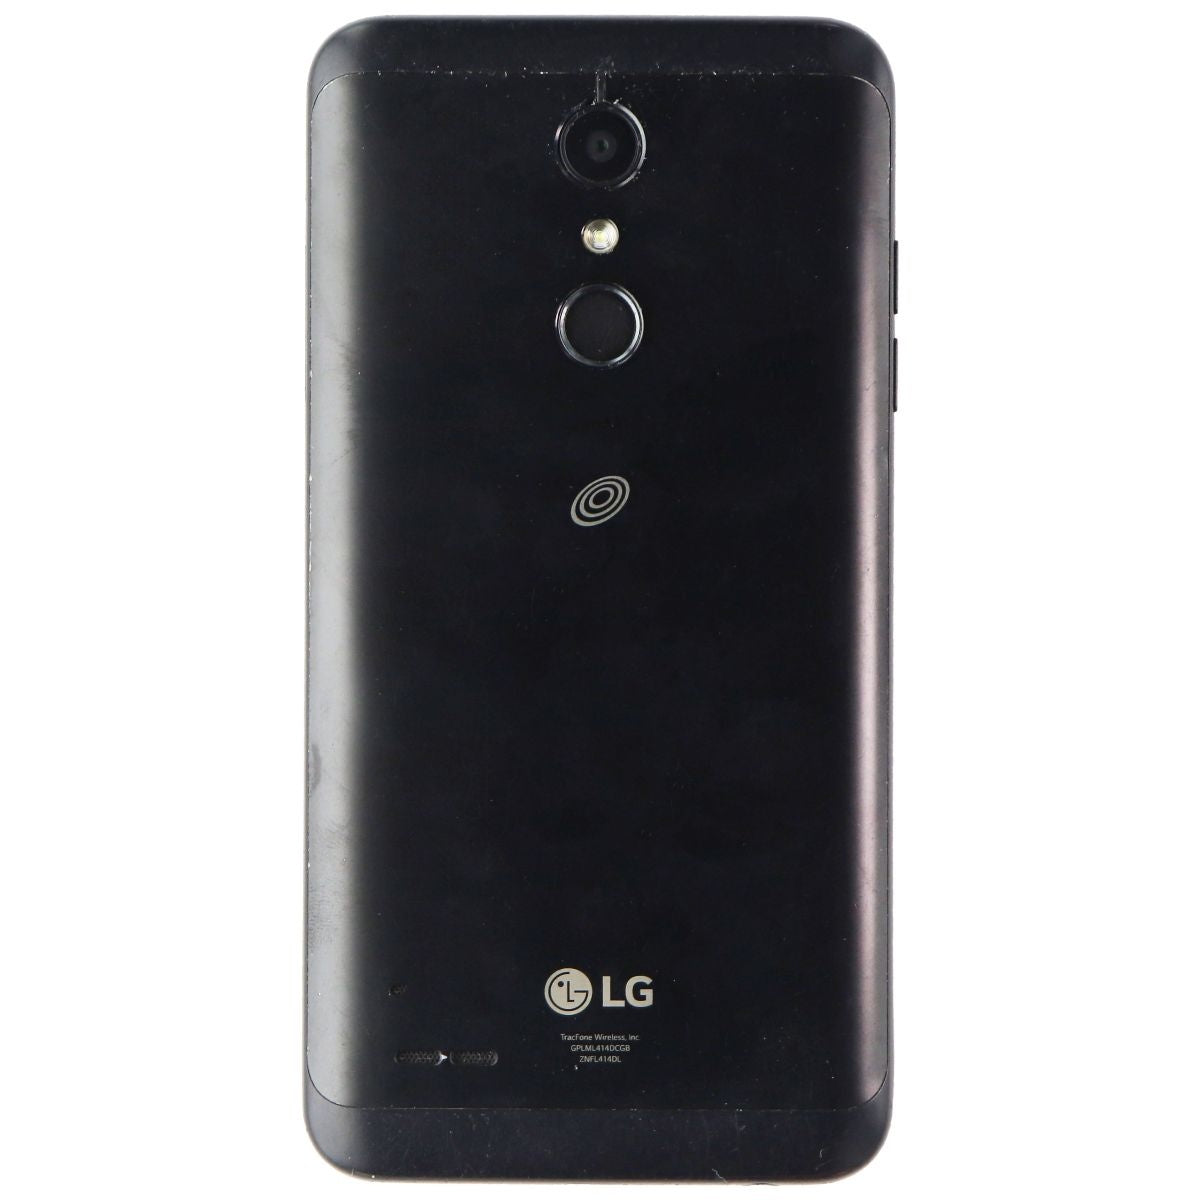 LG Premier Pro LTE (5.3-inch) Smartphone (LML414DL) Tracfone Only - 16GB/Black Cell Phones & Smartphones LG    - Simple Cell Bulk Wholesale Pricing - USA Seller